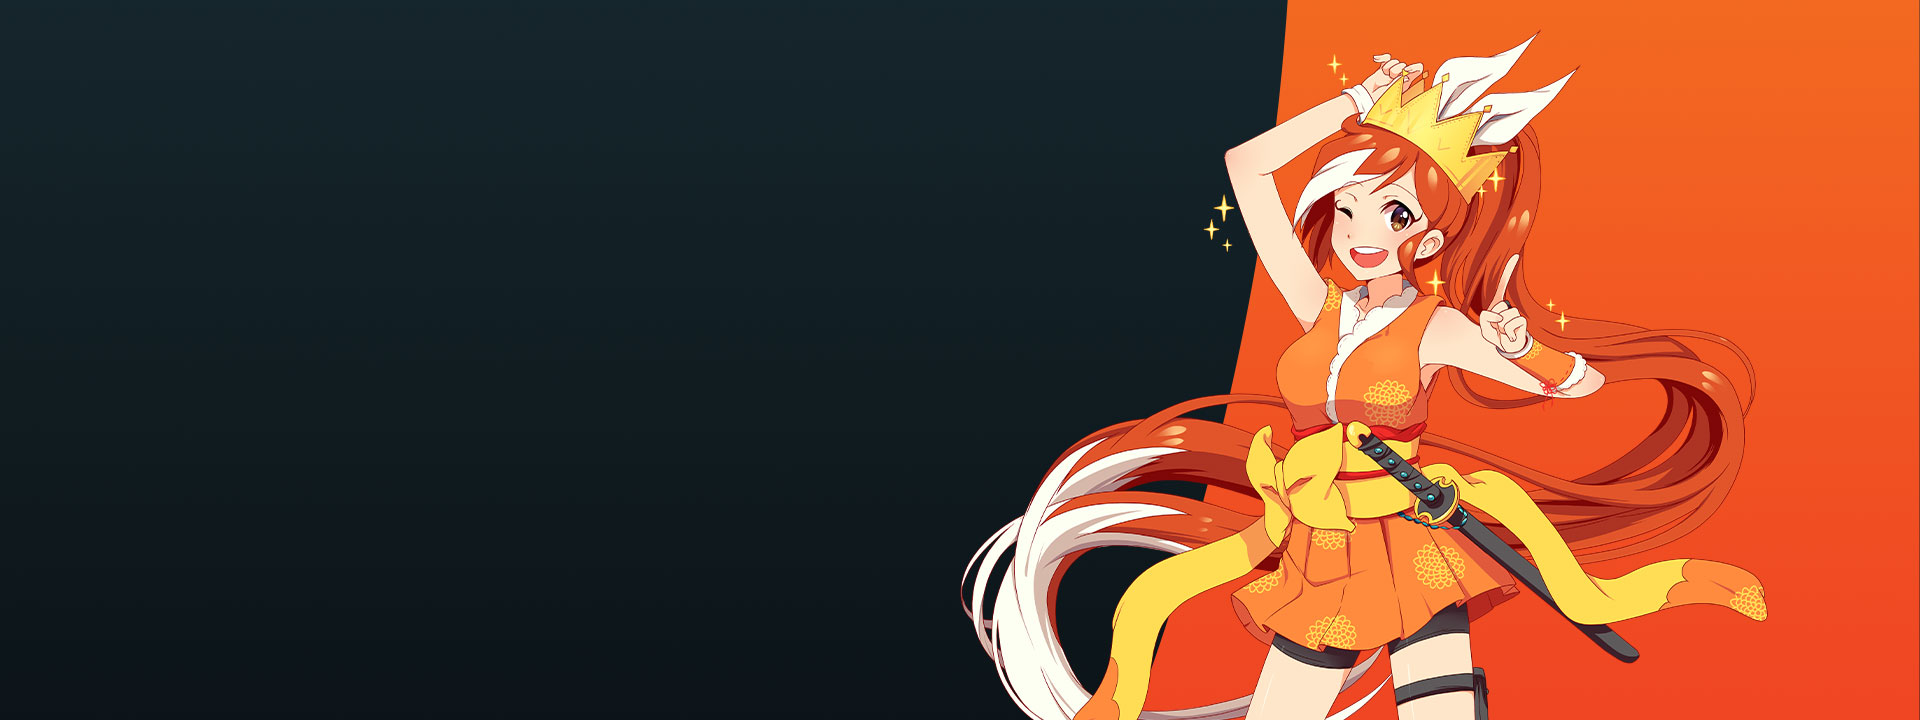 Female anime character on a black and orange background.